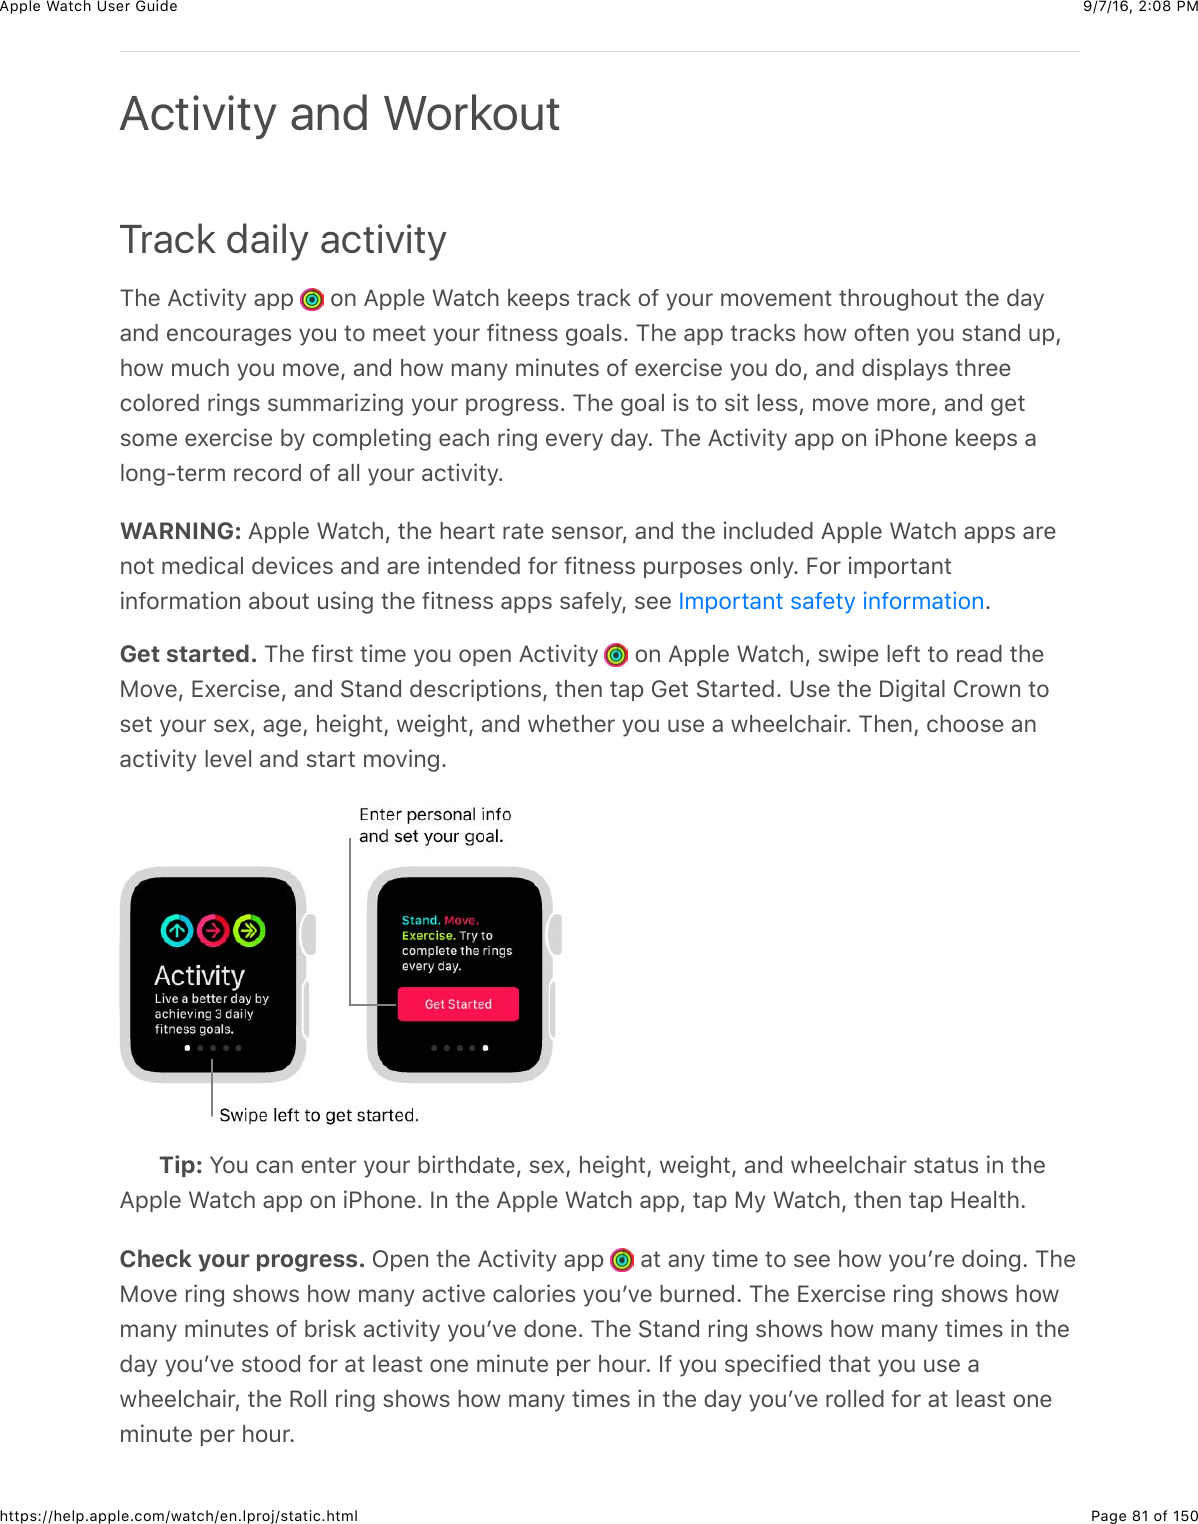 9/7/16, 2)08 PMApple Watch User GuidePage 81 of 150https://help.apple.com/watch/en.lproj/static.htmlTrack daily activity1)%&amp;=(3+.+3/&amp;&apos;22&amp; &amp;#,&amp;=22&quot;%&amp;&gt;&apos;3()&amp;8%%2$&amp;3*&apos;(8&amp;#@&amp;/#4*&amp;5#.%5%,3&amp;3)*#4-)#43&amp;3)%&amp;0&apos;/&apos;,0&amp;%,(#4*&apos;-%$&amp;/#4&amp;3#&amp;5%%3&amp;/#4*&amp;@+3,%$$&amp;-#&apos;&quot;$C&amp;1)%&amp;&apos;22&amp;3*&apos;(8$&amp;)#7&amp;#@3%,&amp;/#4&amp;$3&apos;,0&amp;42J)#7&amp;54()&amp;/#4&amp;5#.%J&amp;&apos;,0&amp;)#7&amp;5&apos;,/&amp;5+,43%$&amp;#@&amp;%U%*(+$%&amp;/#4&amp;0#J&amp;&apos;,0&amp;0+$2&quot;&apos;/$&amp;3)*%%(#&quot;#*%0&amp;*+,-$&amp;$455&apos;*+N+,-&amp;/#4*&amp;2*#-*%$$C&amp;1)%&amp;-#&apos;&quot;&amp;+$&amp;3#&amp;$+3&amp;&quot;%$$J&amp;5#.%&amp;5#*%J&amp;&apos;,0&amp;-%3$#5%&amp;%U%*(+$%&amp;B/&amp;(#52&quot;%3+,-&amp;%&apos;()&amp;*+,-&amp;%.%*/&amp;0&apos;/C&amp;1)%&amp;=(3+.+3/&amp;&apos;22&amp;#,&amp;+G)#,%&amp;8%%2$&amp;&apos;&quot;#,-?3%*5&amp;*%(#*0&amp;#@&amp;&apos;&quot;&quot;&amp;/#4*&amp;&apos;(3+.+3/CWARNING: =22&quot;%&amp;&gt;&apos;3()J&amp;3)%&amp;)%&apos;*3&amp;*&apos;3%&amp;$%,$#*J&amp;&apos;,0&amp;3)%&amp;+,(&quot;40%0&amp;=22&quot;%&amp;&gt;&apos;3()&amp;&apos;22$&amp;&apos;*%,#3&amp;5%0+(&apos;&quot;&amp;0%.+(%$&amp;&apos;,0&amp;&apos;*%&amp;+,3%,0%0&amp;@#*&amp;@+3,%$$&amp;24*2#$%$&amp;#,&quot;/C&amp;E#*&amp;+52#*3&apos;,3+,@#*5&apos;3+#,&amp;&apos;B#43&amp;4$+,-&amp;3)%&amp;@+3,%$$&amp;&apos;22$&amp;$&apos;@%&quot;/J&amp;$%%&amp; CGet started. 1)%&amp;@+*$3&amp;3+5%&amp;/#4&amp;#2%,&amp;=(3+.+3/&amp; &amp;#,&amp;=22&quot;%&amp;&gt;&apos;3()J&amp;$7+2%&amp;&quot;%@3&amp;3#&amp;*%&apos;0&amp;3)%F#.%J&amp;ZU%*(+$%J&amp;&apos;,0&amp;63&apos;,0&amp;0%$(*+23+#,$J&amp;3)%,&amp;3&apos;2&amp;D%3&amp;63&apos;*3%0C&amp;K$%&amp;3)%&amp;I+-+3&apos;&quot;&amp;!*#7,&amp;3#$%3&amp;/#4*&amp;$%UJ&amp;&apos;-%J&amp;)%+-)3J&amp;7%+-)3J&amp;&apos;,0&amp;7)%3)%*&amp;/#4&amp;4$%&amp;&apos;&amp;7)%%&quot;()&apos;+*C&amp;1)%,J&amp;()##$%&amp;&apos;,&apos;(3+.+3/&amp;&quot;%.%&quot;&amp;&apos;,0&amp;$3&apos;*3&amp;5#.+,-CTip: S#4&amp;(&apos;,&amp;%,3%*&amp;/#4*&amp;B+*3)0&apos;3%J&amp;$%UJ&amp;)%+-)3J&amp;7%+-)3J&amp;&apos;,0&amp;7)%%&quot;()&apos;+*&amp;$3&apos;34$&amp;+,&amp;3)%=22&quot;%&amp;&gt;&apos;3()&amp;&apos;22&amp;#,&amp;+G)#,%C&amp;Y,&amp;3)%&amp;=22&quot;%&amp;&gt;&apos;3()&amp;&apos;22J&amp;3&apos;2&amp;F/&amp;&gt;&apos;3()J&amp;3)%,&amp;3&apos;2&amp;9%&apos;&quot;3)CCheck your progress. L2%,&amp;3)%&amp;=(3+.+3/&amp;&apos;22&amp; &amp;&apos;3&amp;&apos;,/&amp;3+5%&amp;3#&amp;$%%&amp;)#7&amp;/#4W*%&amp;0#+,-C&amp;1)%F#.%&amp;*+,-&amp;$)#7$&amp;)#7&amp;5&apos;,/&amp;&apos;(3+.%&amp;(&apos;&quot;#*+%$&amp;/#4W.%&amp;B4*,%0C&amp;1)%&amp;ZU%*(+$%&amp;*+,-&amp;$)#7$&amp;)#75&apos;,/&amp;5+,43%$&amp;#@&amp;B*+$8&amp;&apos;(3+.+3/&amp;/#4W.%&amp;0#,%C&amp;1)%&amp;63&apos;,0&amp;*+,-&amp;$)#7$&amp;)#7&amp;5&apos;,/&amp;3+5%$&amp;+,&amp;3)%0&apos;/&amp;/#4W.%&amp;$3##0&amp;@#*&amp;&apos;3&amp;&quot;%&apos;$3&amp;#,%&amp;5+,43%&amp;2%*&amp;)#4*C&amp;Y@&amp;/#4&amp;$2%(+@+%0&amp;3)&apos;3&amp;/#4&amp;4$%&amp;&apos;7)%%&quot;()&apos;+*J&amp;3)%&amp;H#&quot;&quot;&amp;*+,-&amp;$)#7$&amp;)#7&amp;5&apos;,/&amp;3+5%$&amp;+,&amp;3)%&amp;0&apos;/&amp;/#4W.%&amp;*#&quot;&quot;%0&amp;@#*&amp;&apos;3&amp;&quot;%&apos;$3&amp;#,%5+,43%&amp;2%*&amp;)#4*CActivity and WorkoutY52#*3&apos;,3&amp;$&apos;@%3/&amp;+,@#*5&apos;3+#,